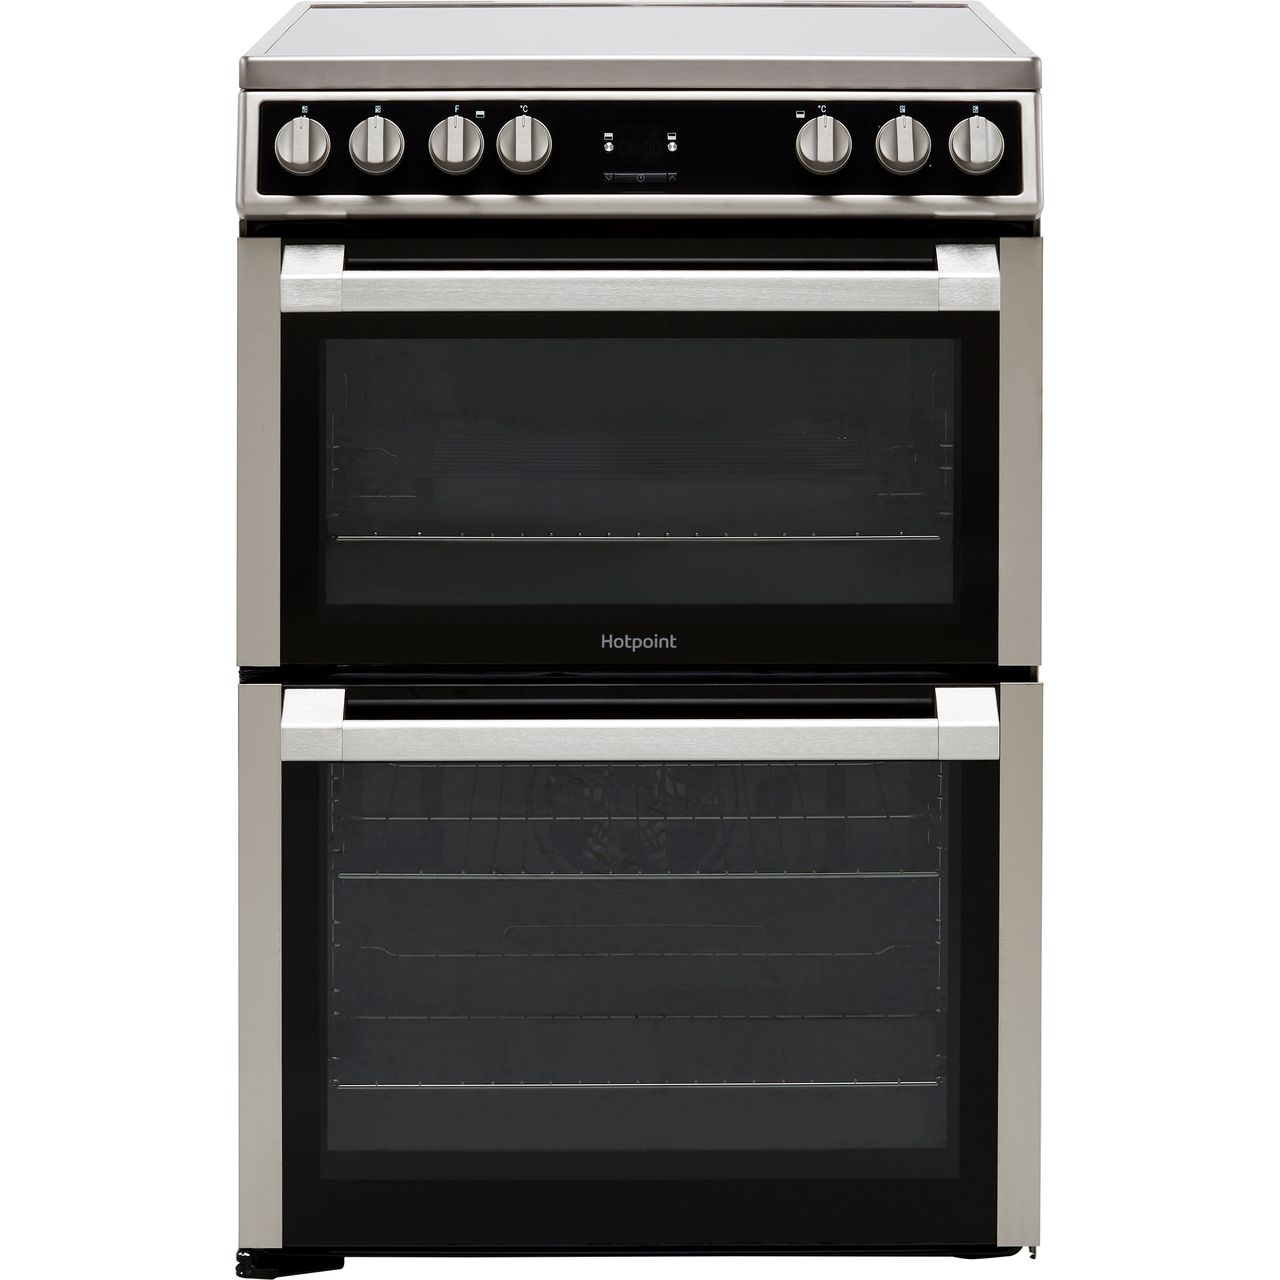 Hotpoint HDT67V9H2CX/UK 60cm Electric Cooker with Ceramic Hob - Silver - A/A Rated, Silver